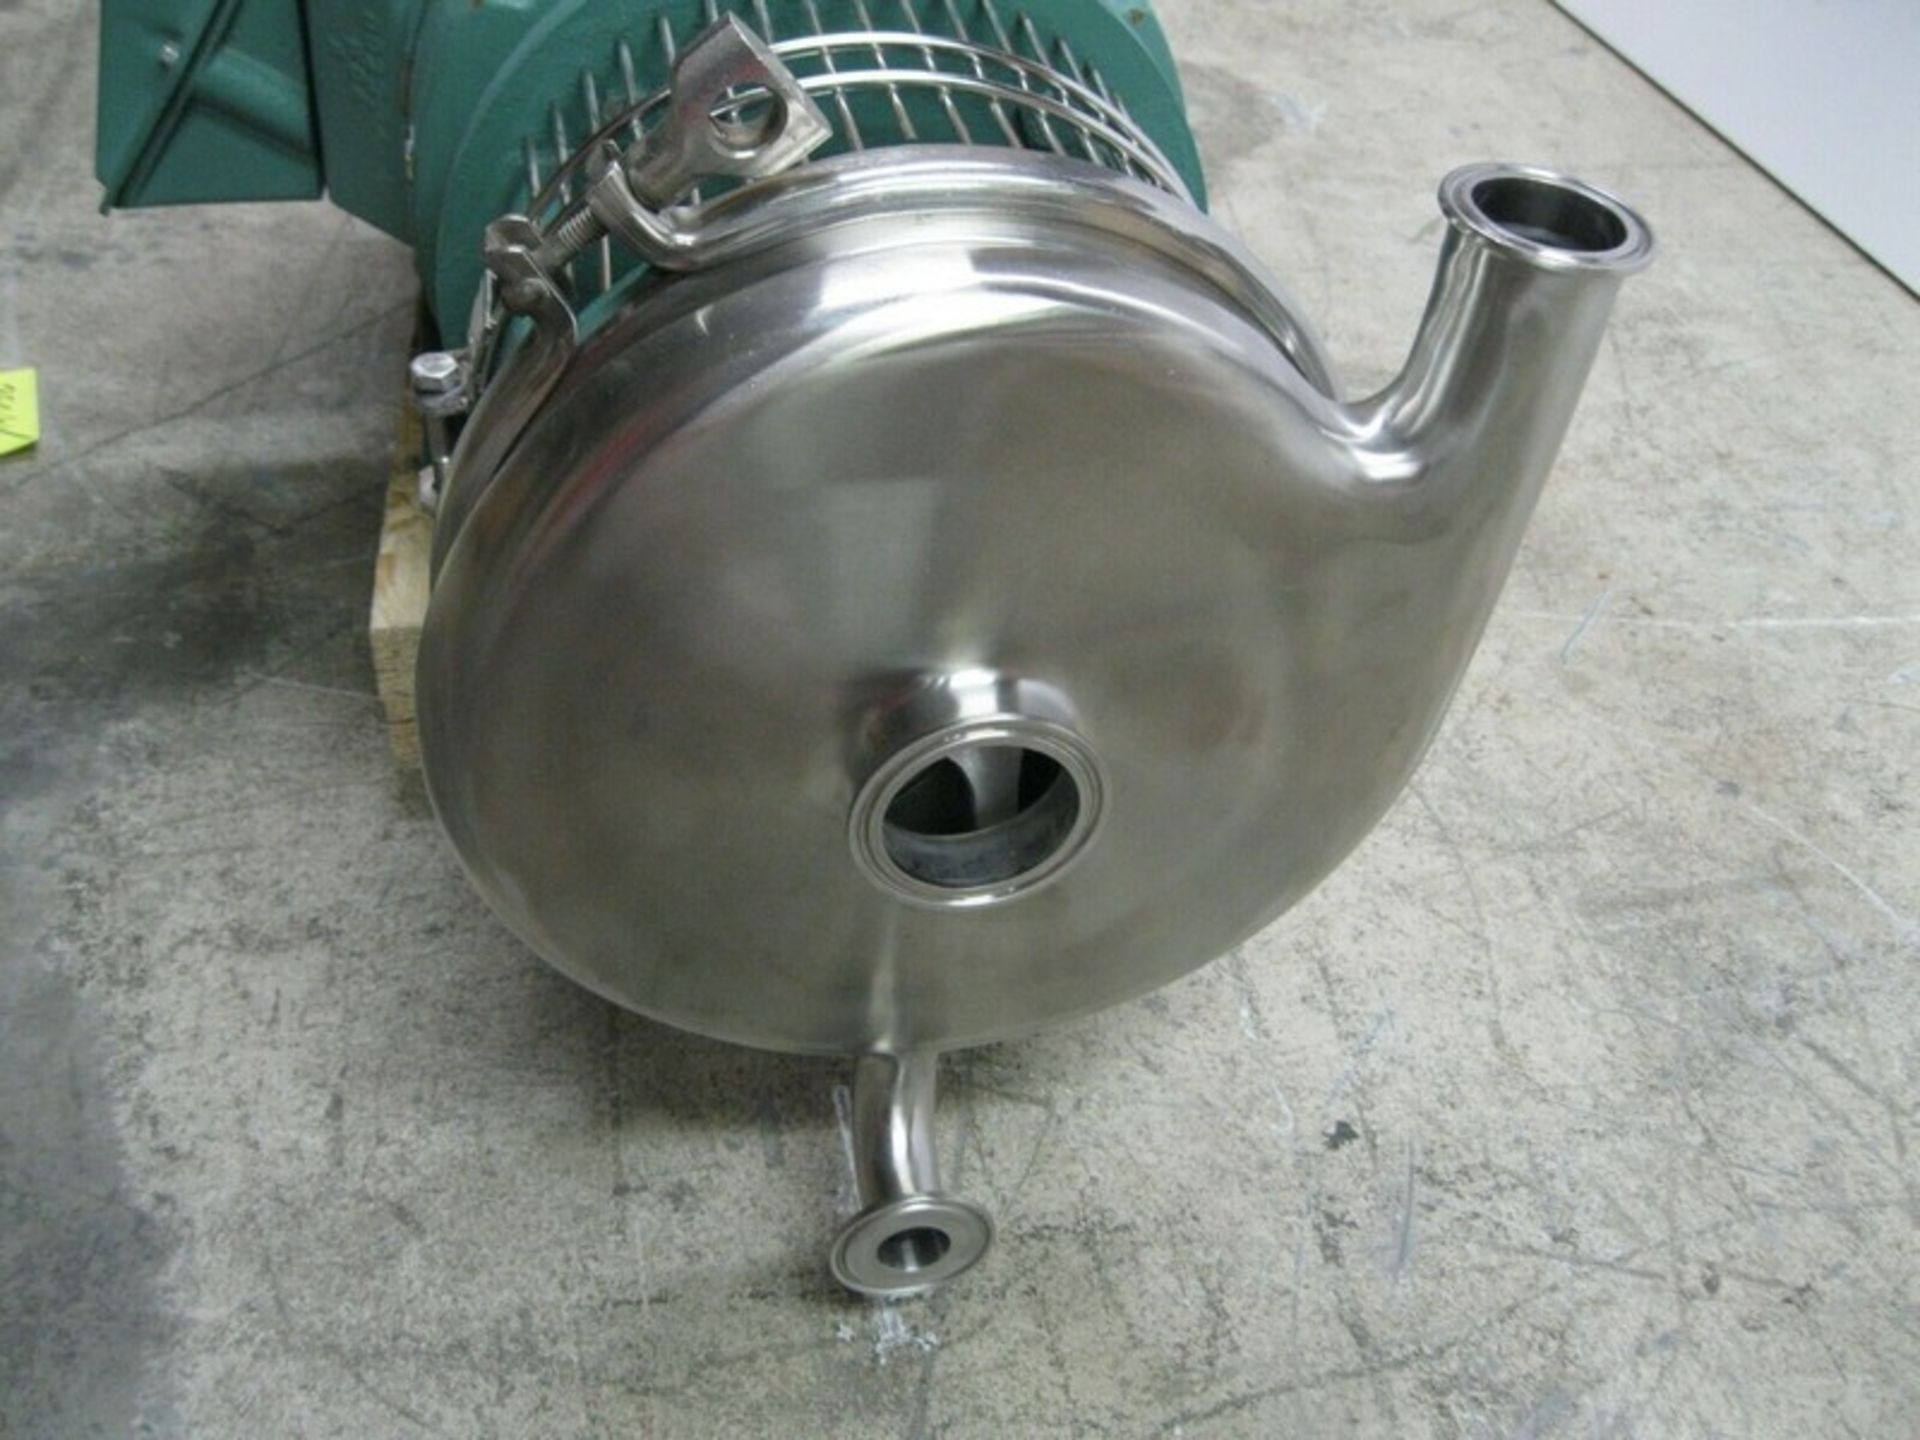 2" x 1-1/2" Tri-Clover C218 Sanitary Centrifugal Pump 15 HP Motor (NOTE: Packing and Palletizing - Image 5 of 8